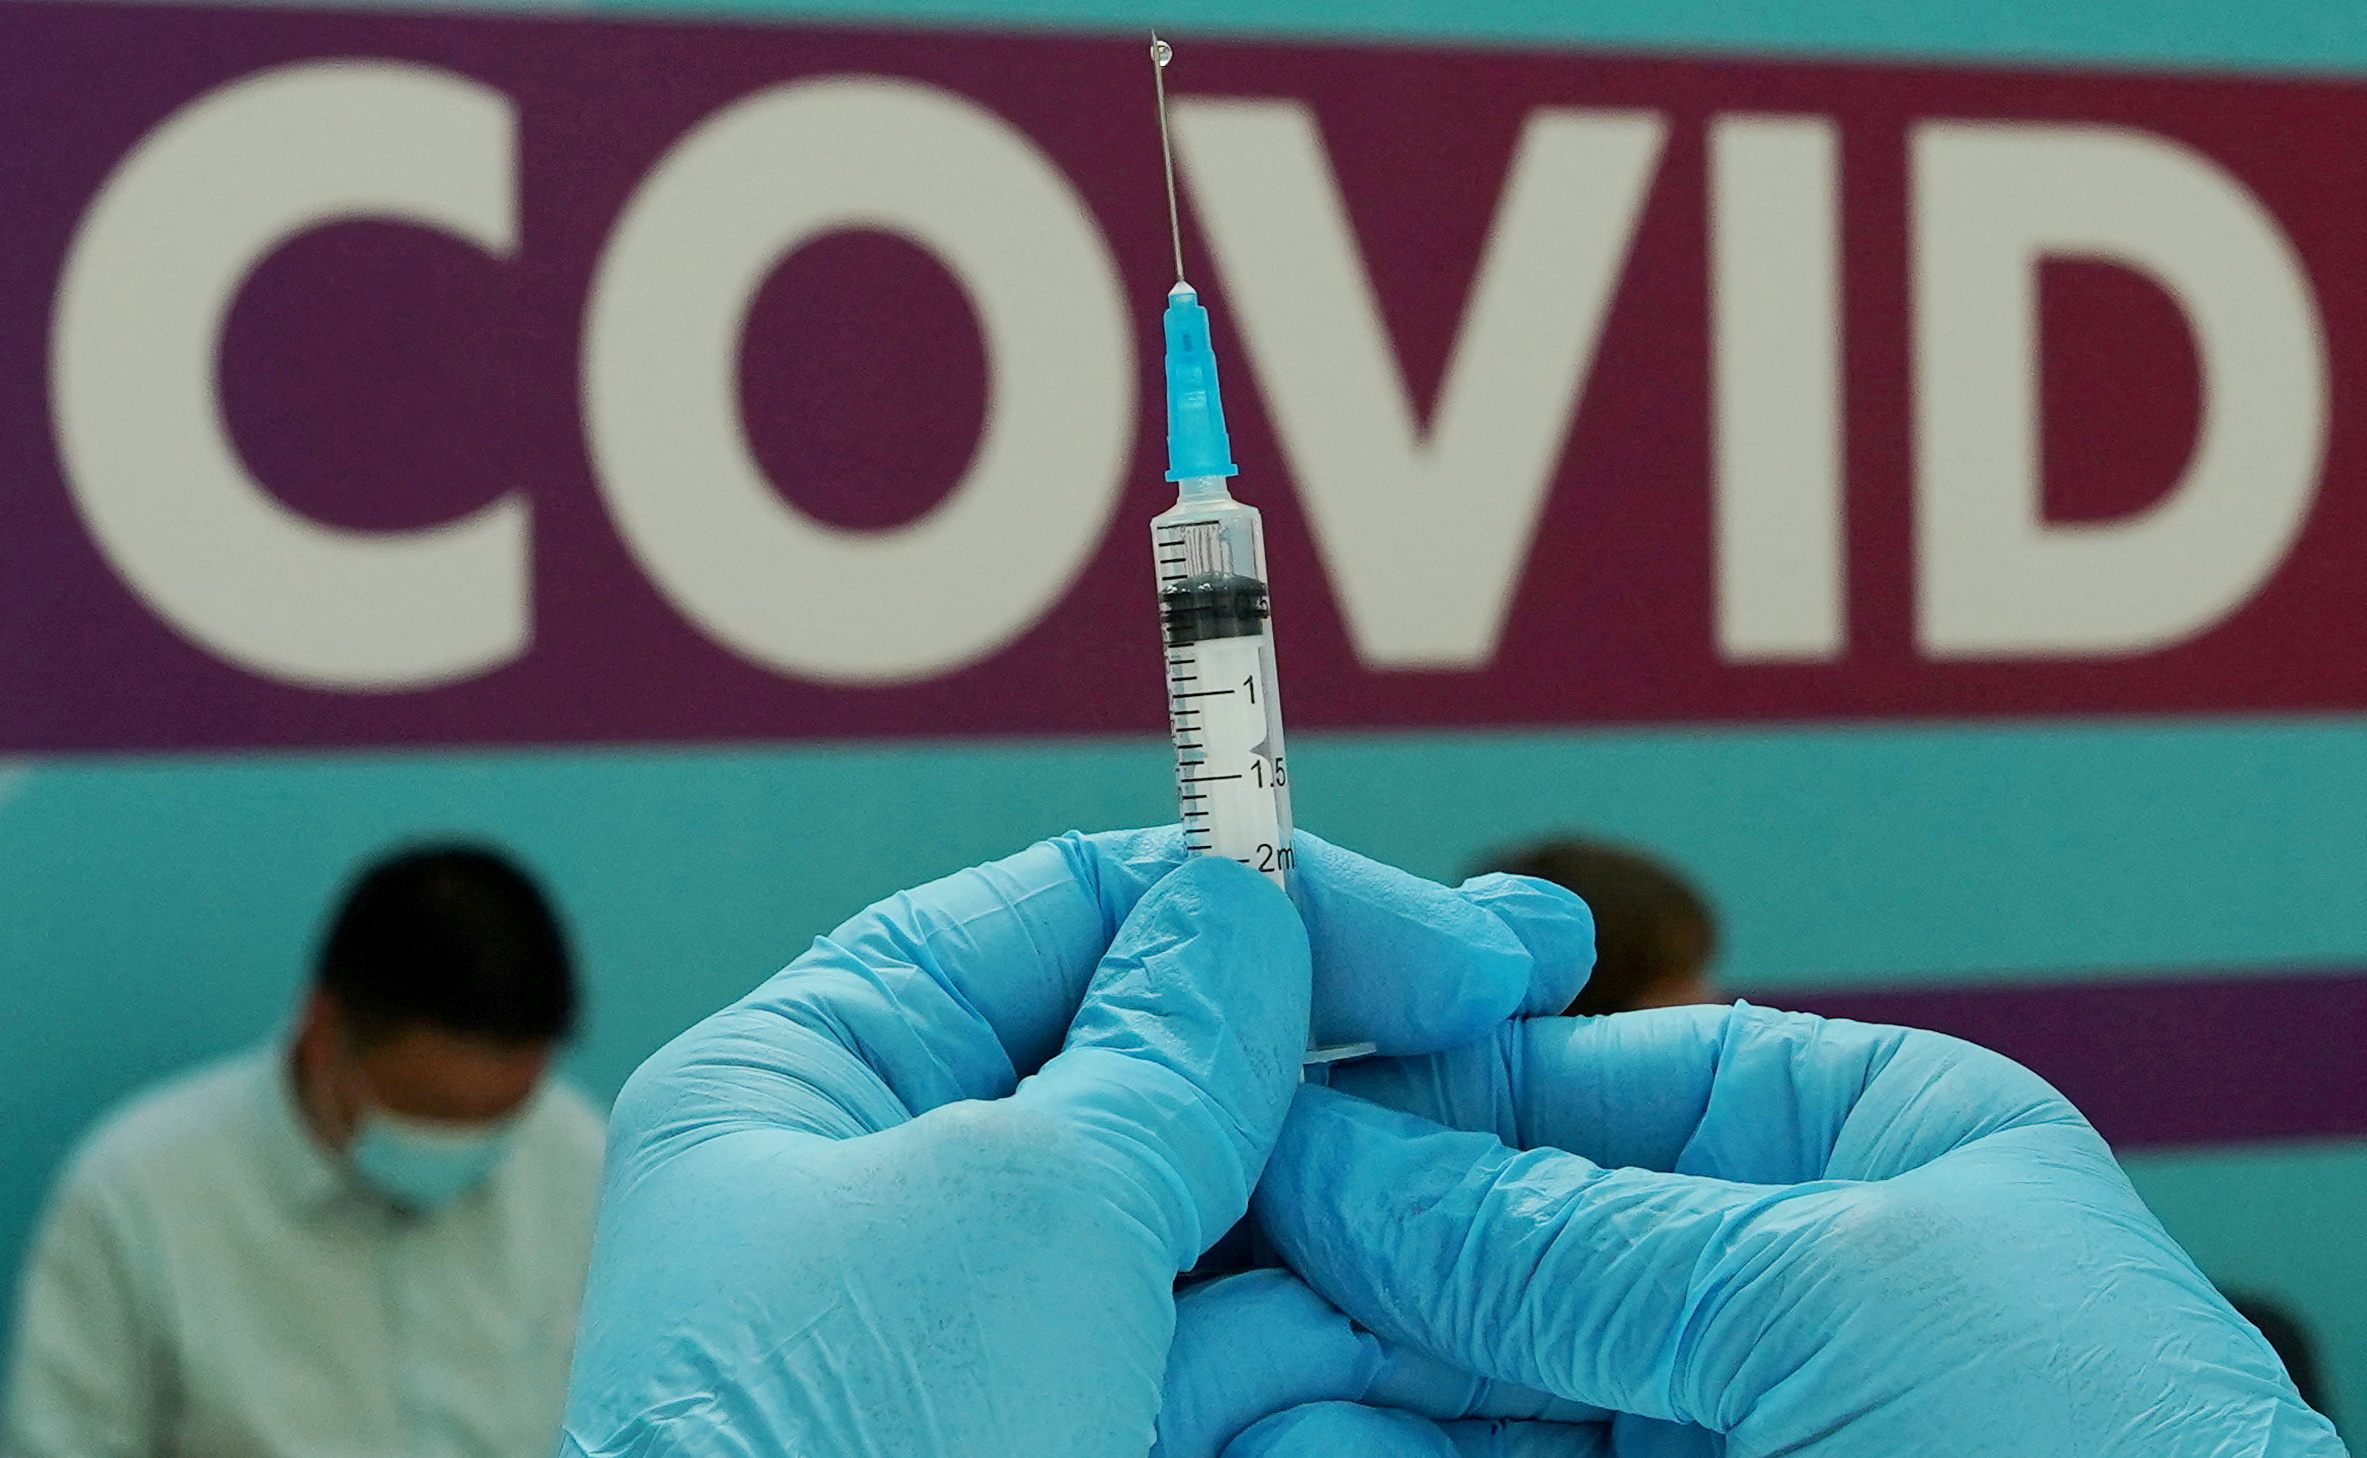 The technology behind the new vaccines could be applied to other diseases (REUTERS/Tatyana Makeyeva/File Photo)